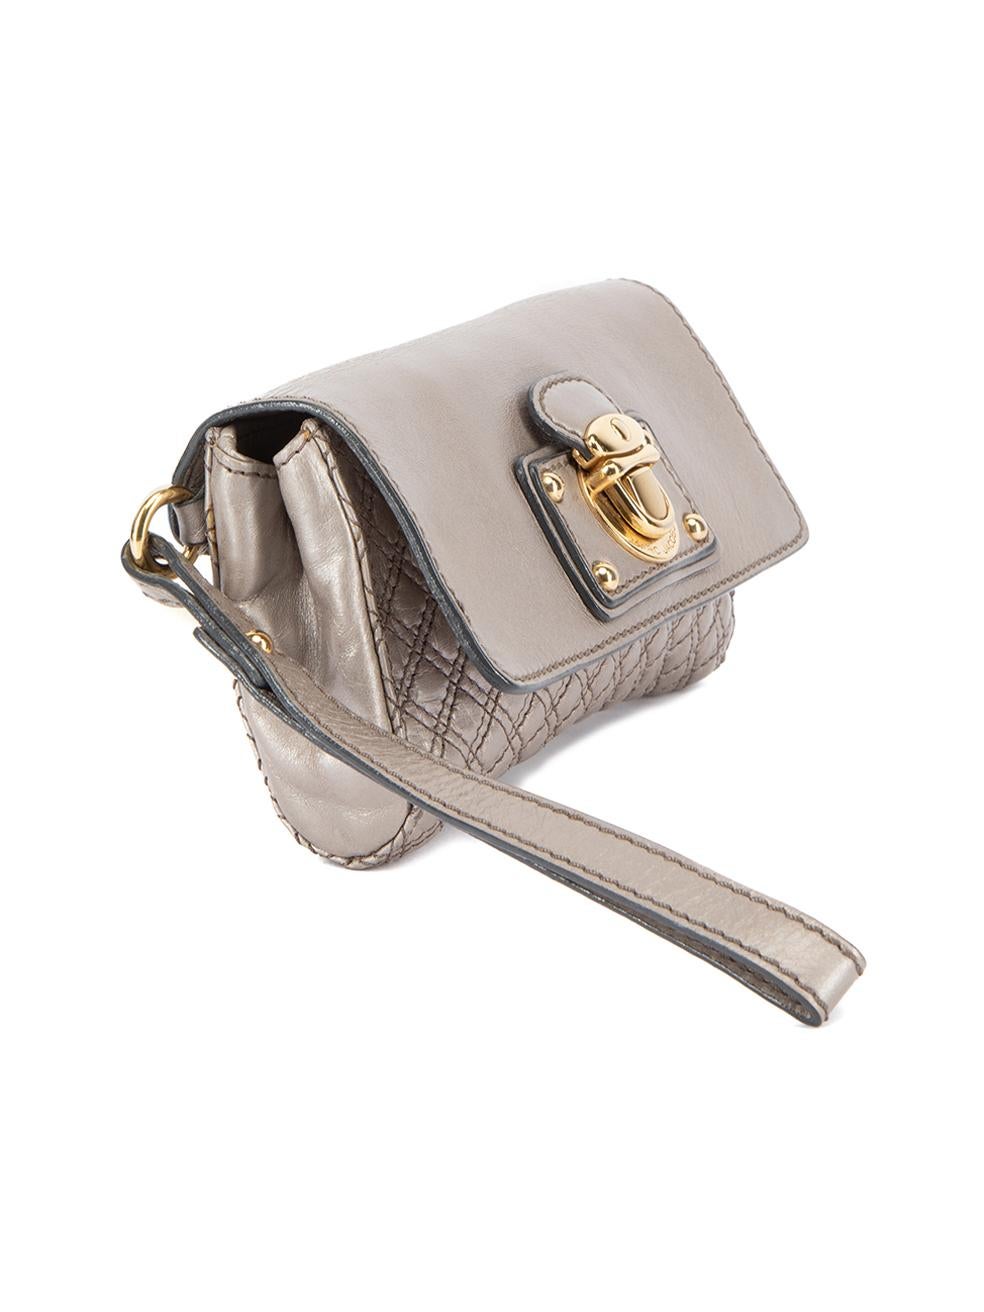 CONDITION is Good. General wear to purse is evident. Moderate signs of wear to the leather exterior and gold hardware. There is also wear and stains to the interior from general use on this used Marc Jacobs designer resale item. This item comes with